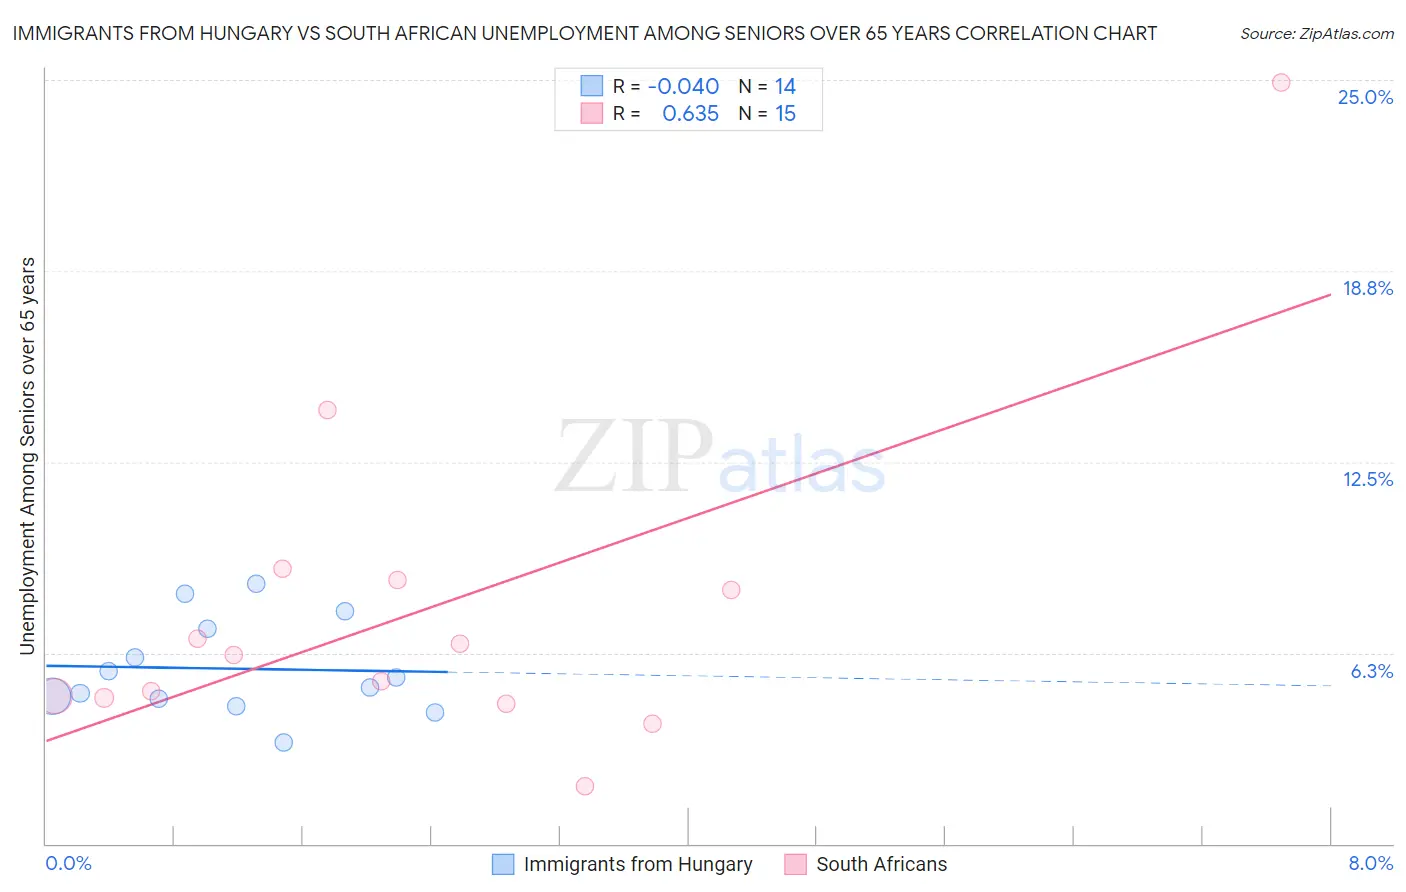 Immigrants from Hungary vs South African Unemployment Among Seniors over 65 years